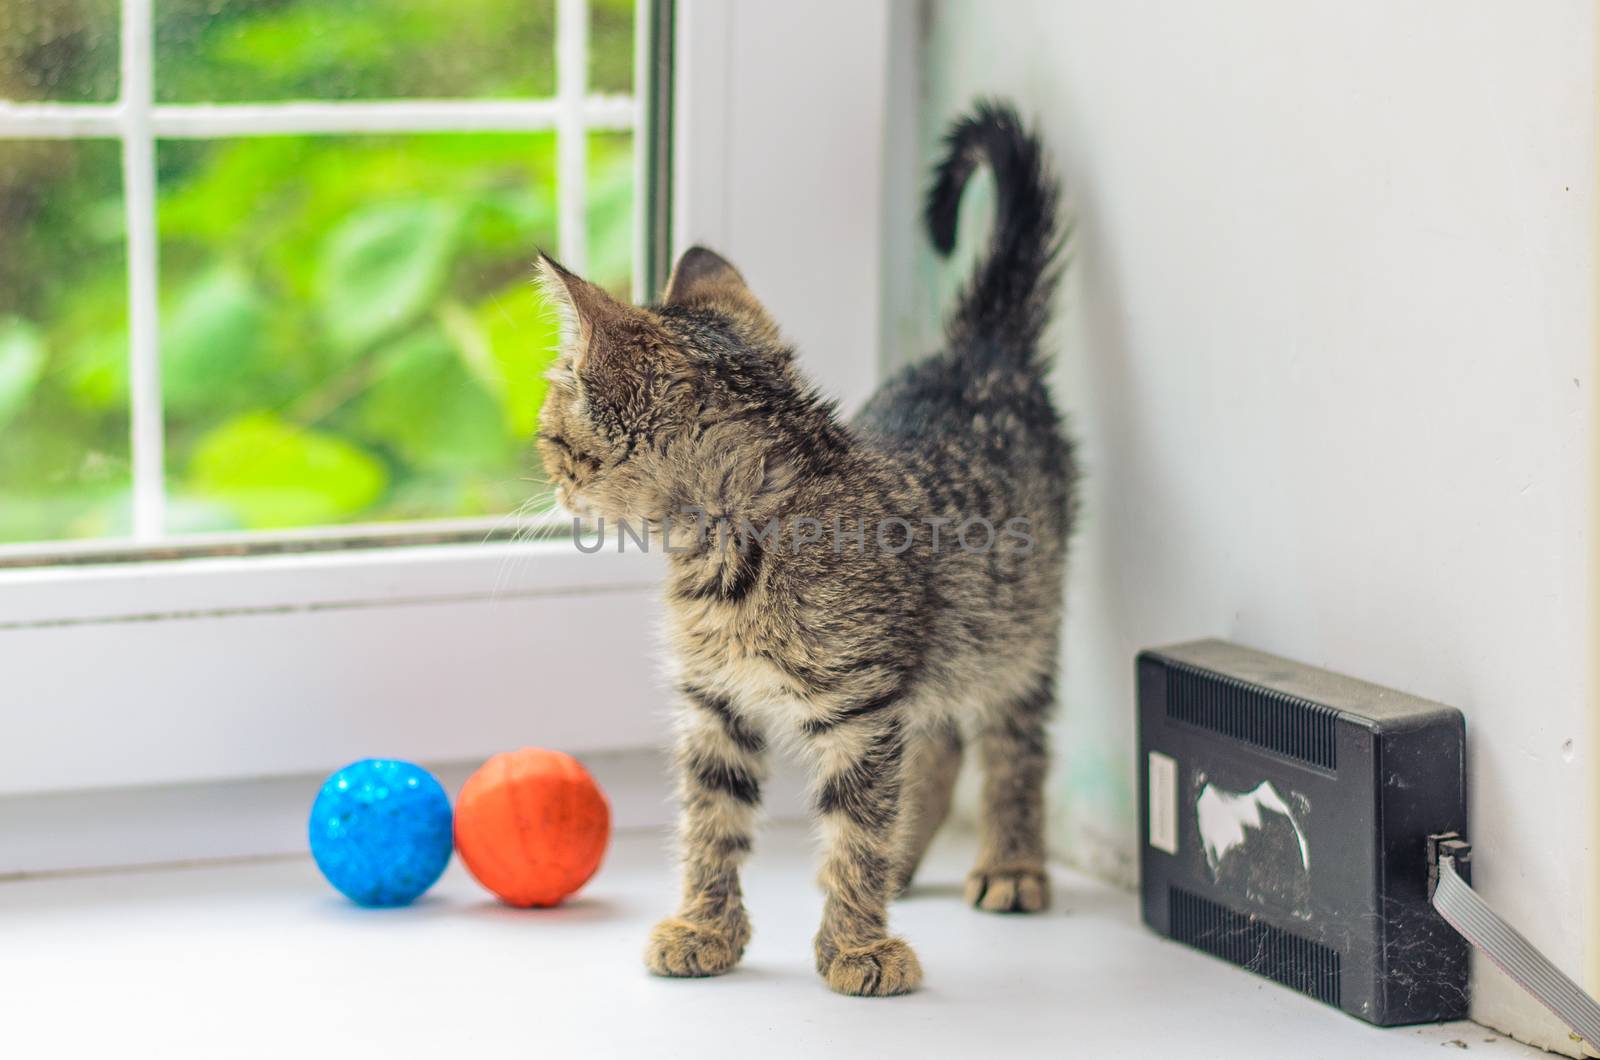 Gray kitten looks out the window near the blue and orange balls by chernobrovin